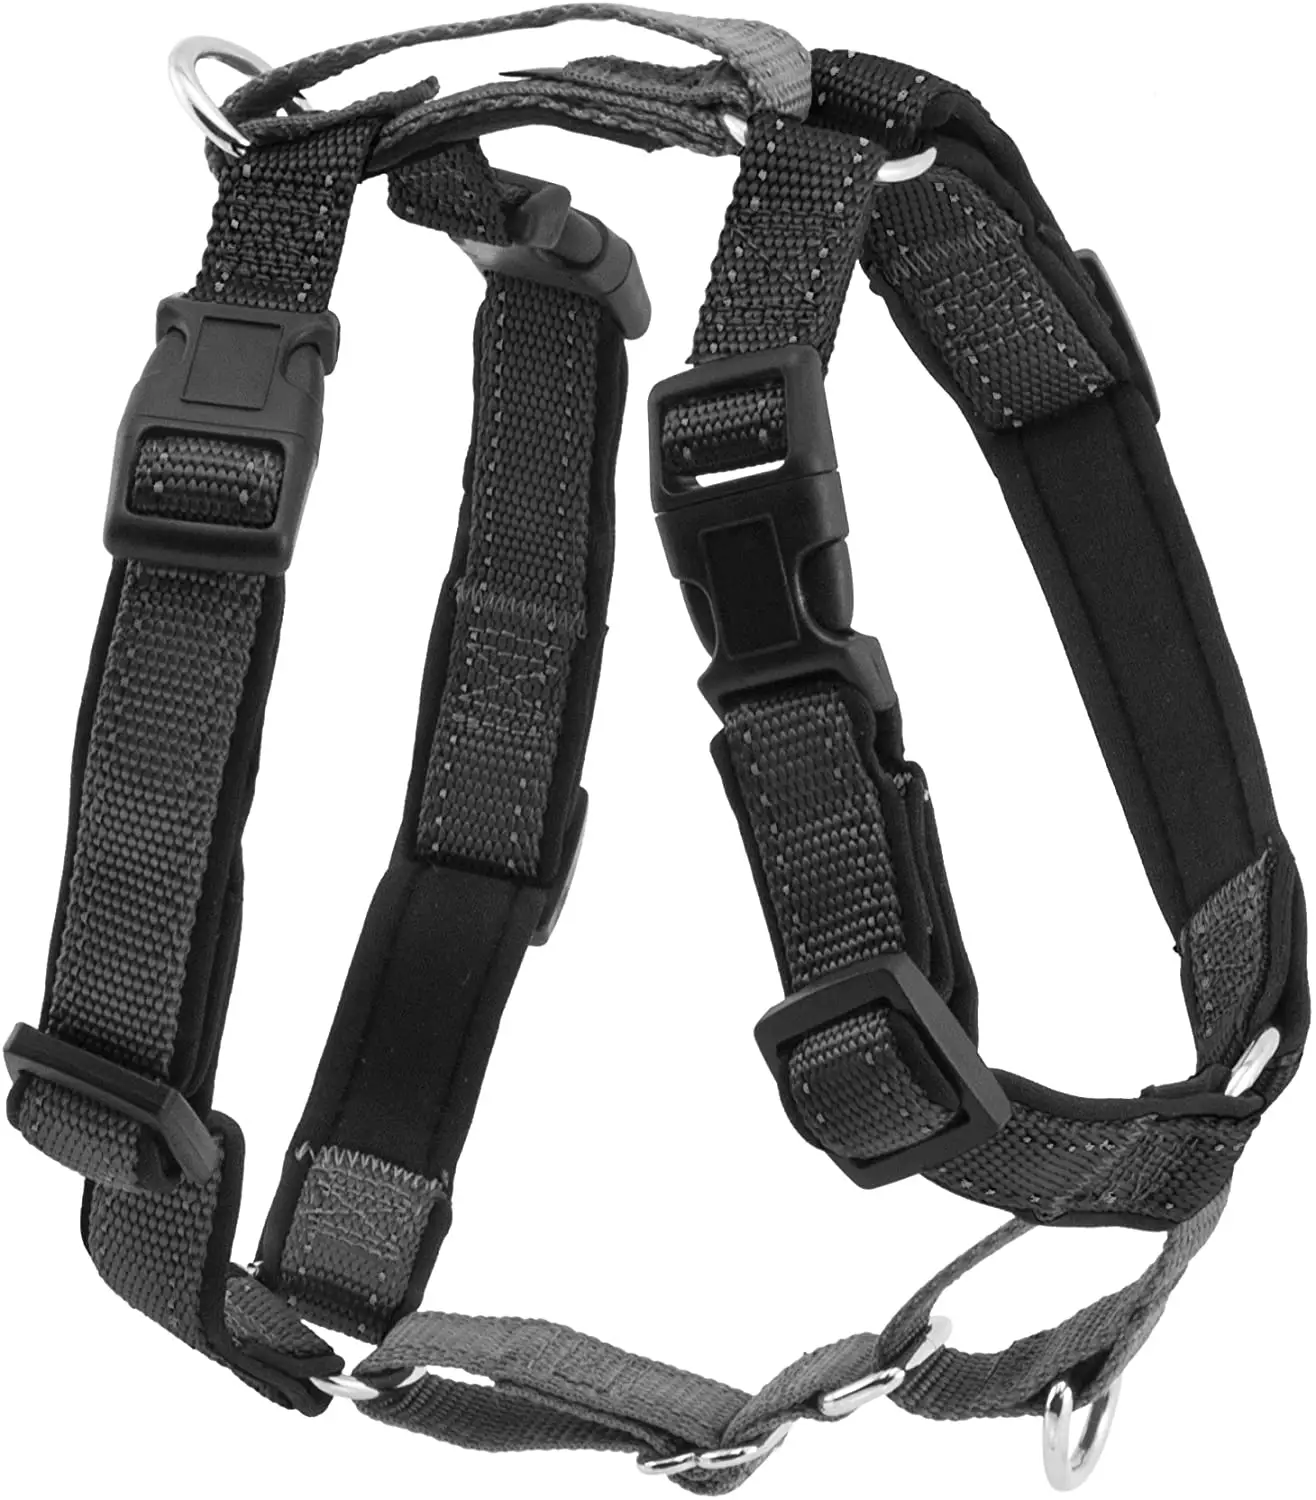 10 Best Harnesses For Border Collies Who Love The Outdoors